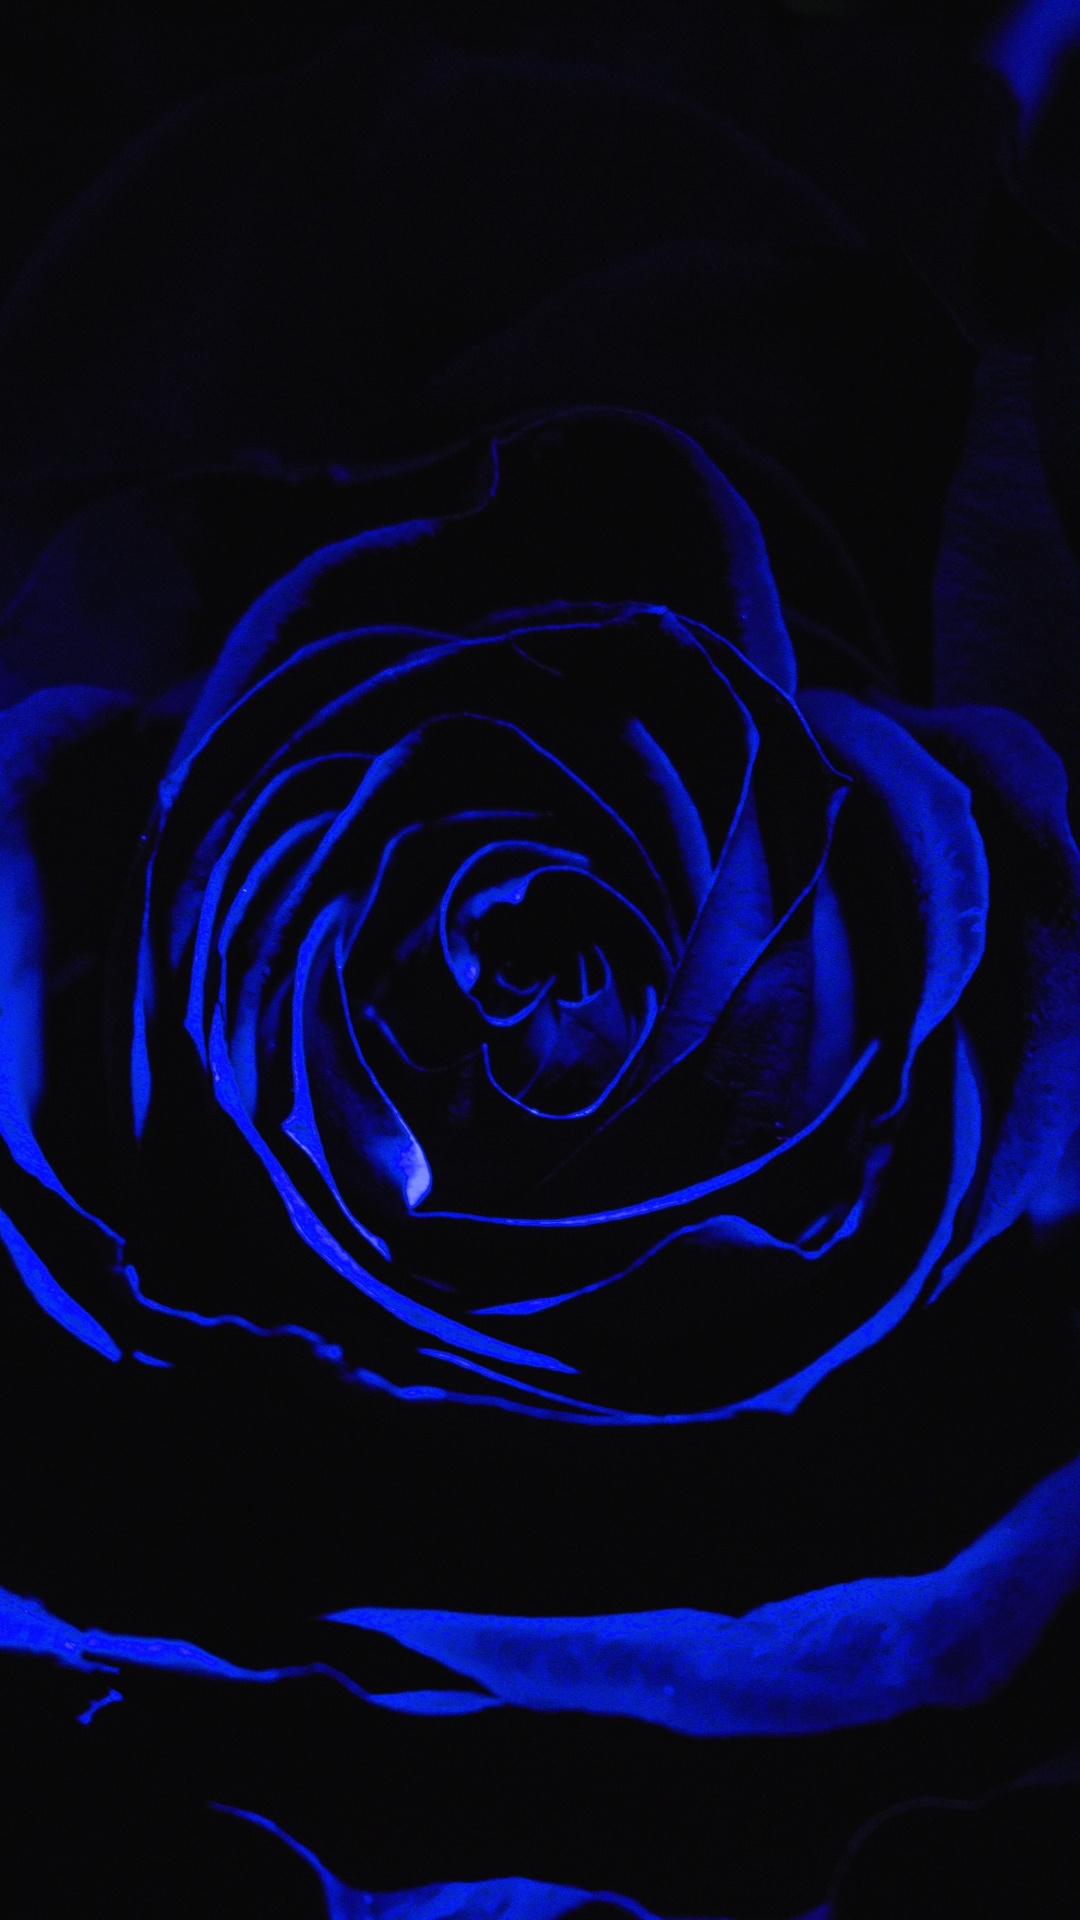 Blue Rose in Close up Photography. Wallpaper in 1080x1920 Resolution